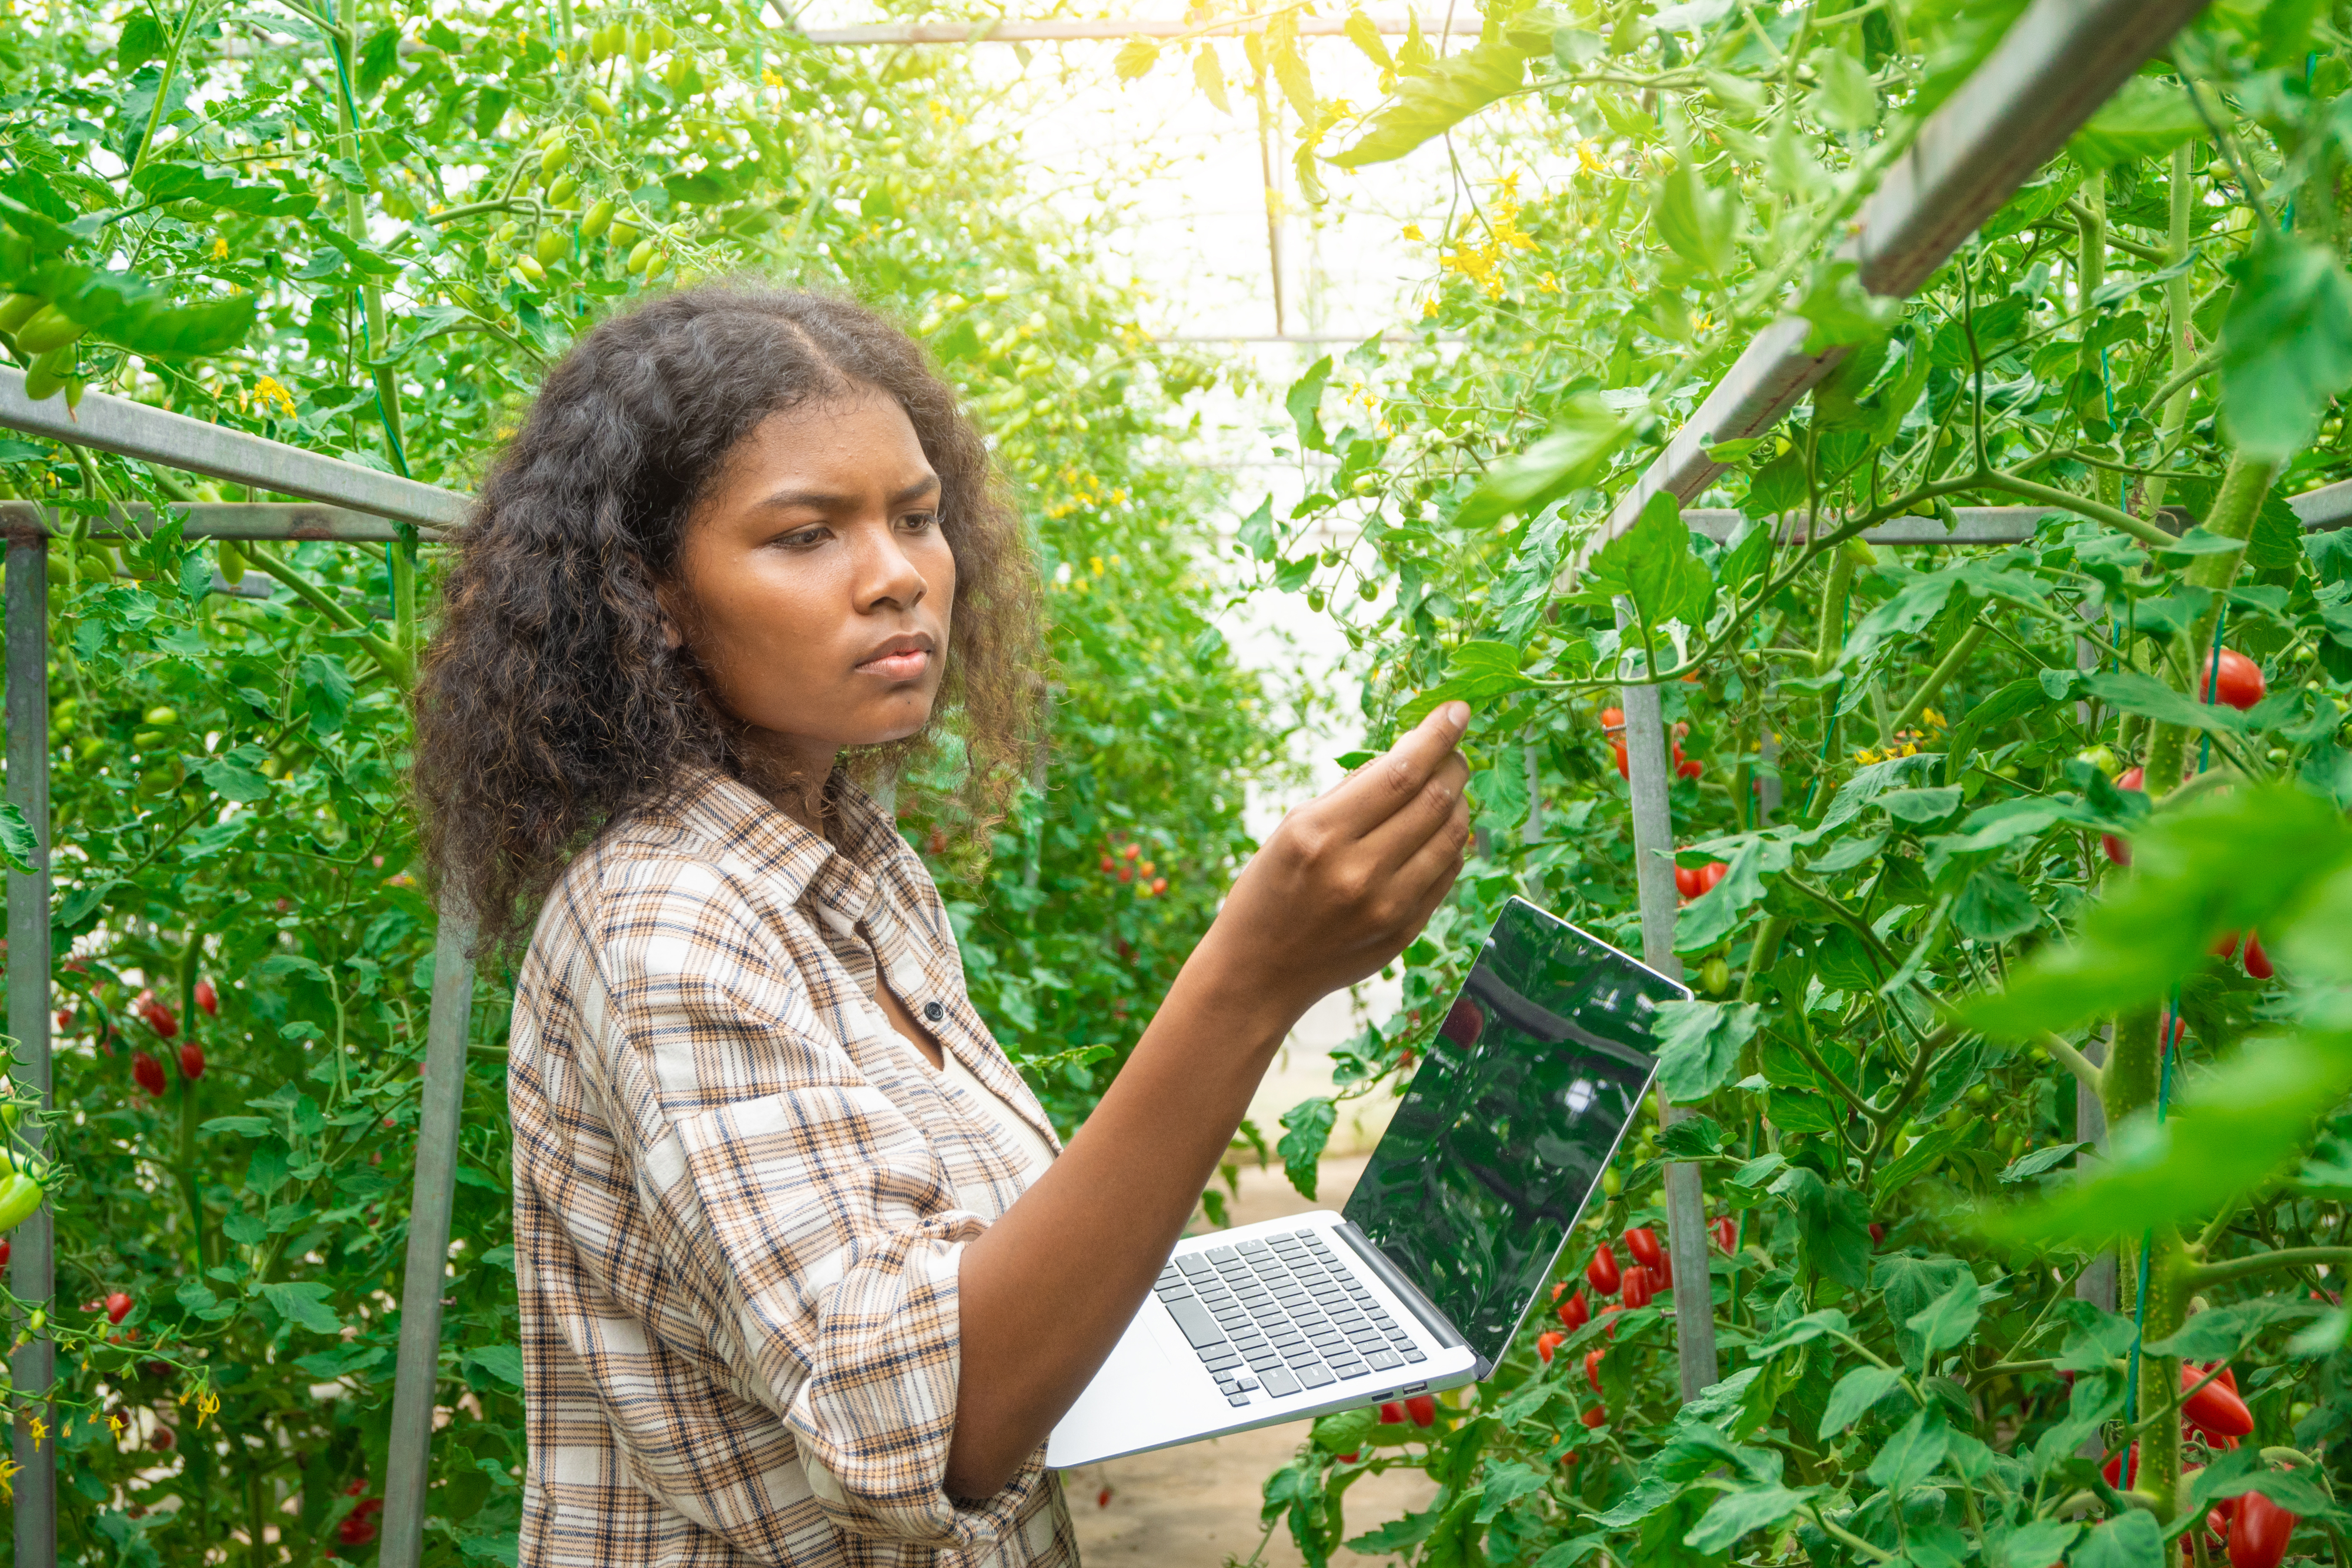 A woman holding a laptop and inspecting a plant with her free hand